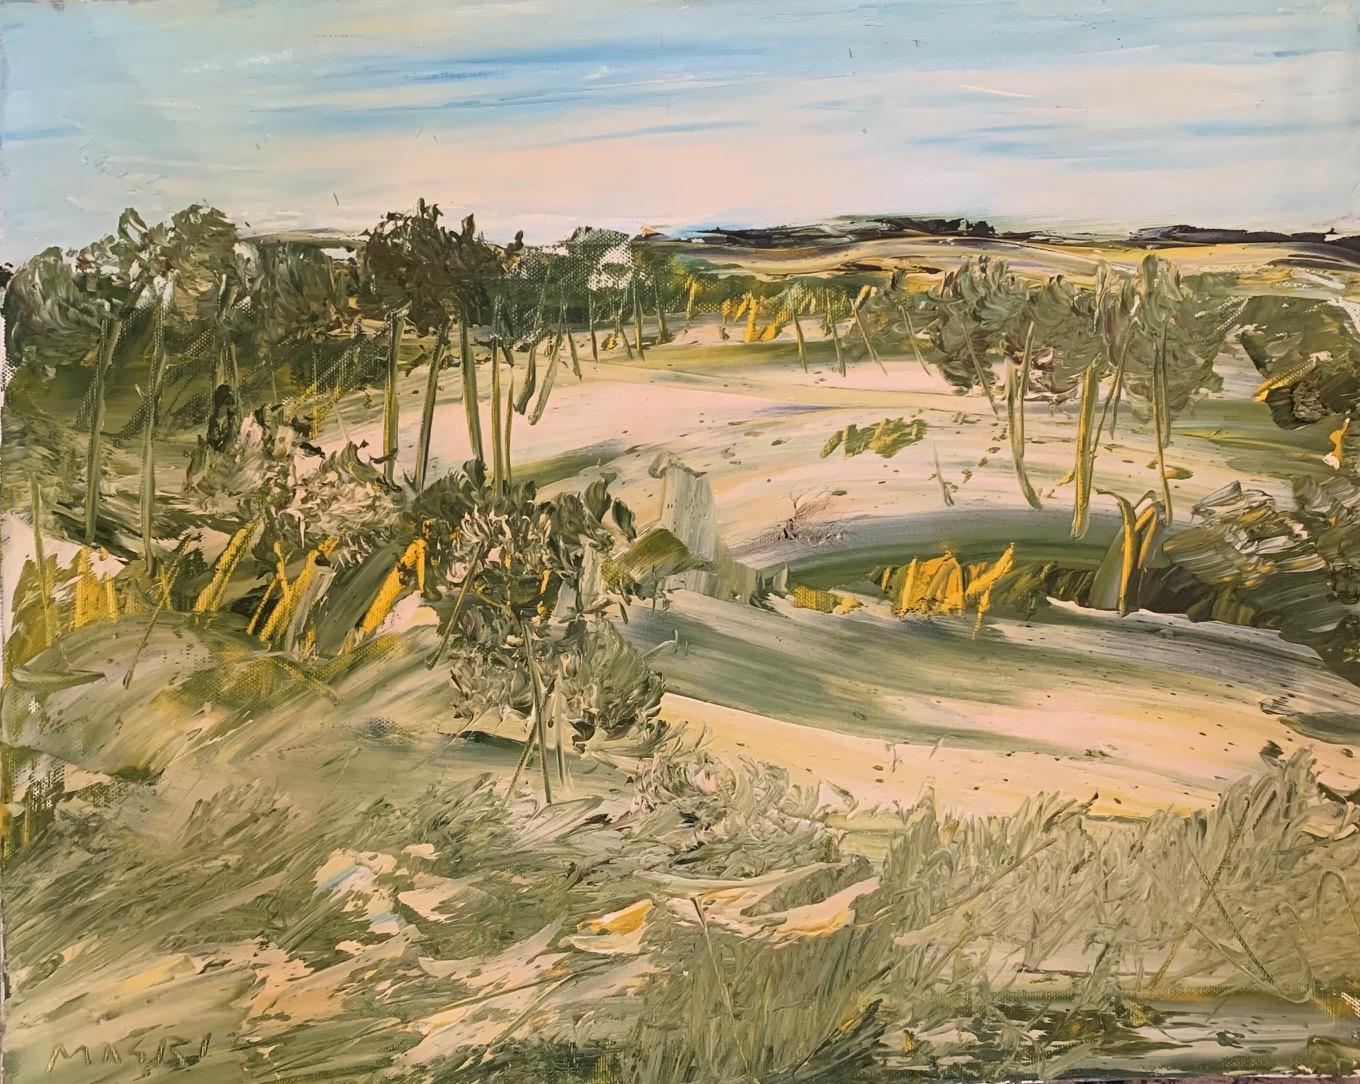 'Tuscany Rolling Hills And Trees' oil on canvas by Masri - Landscape Art